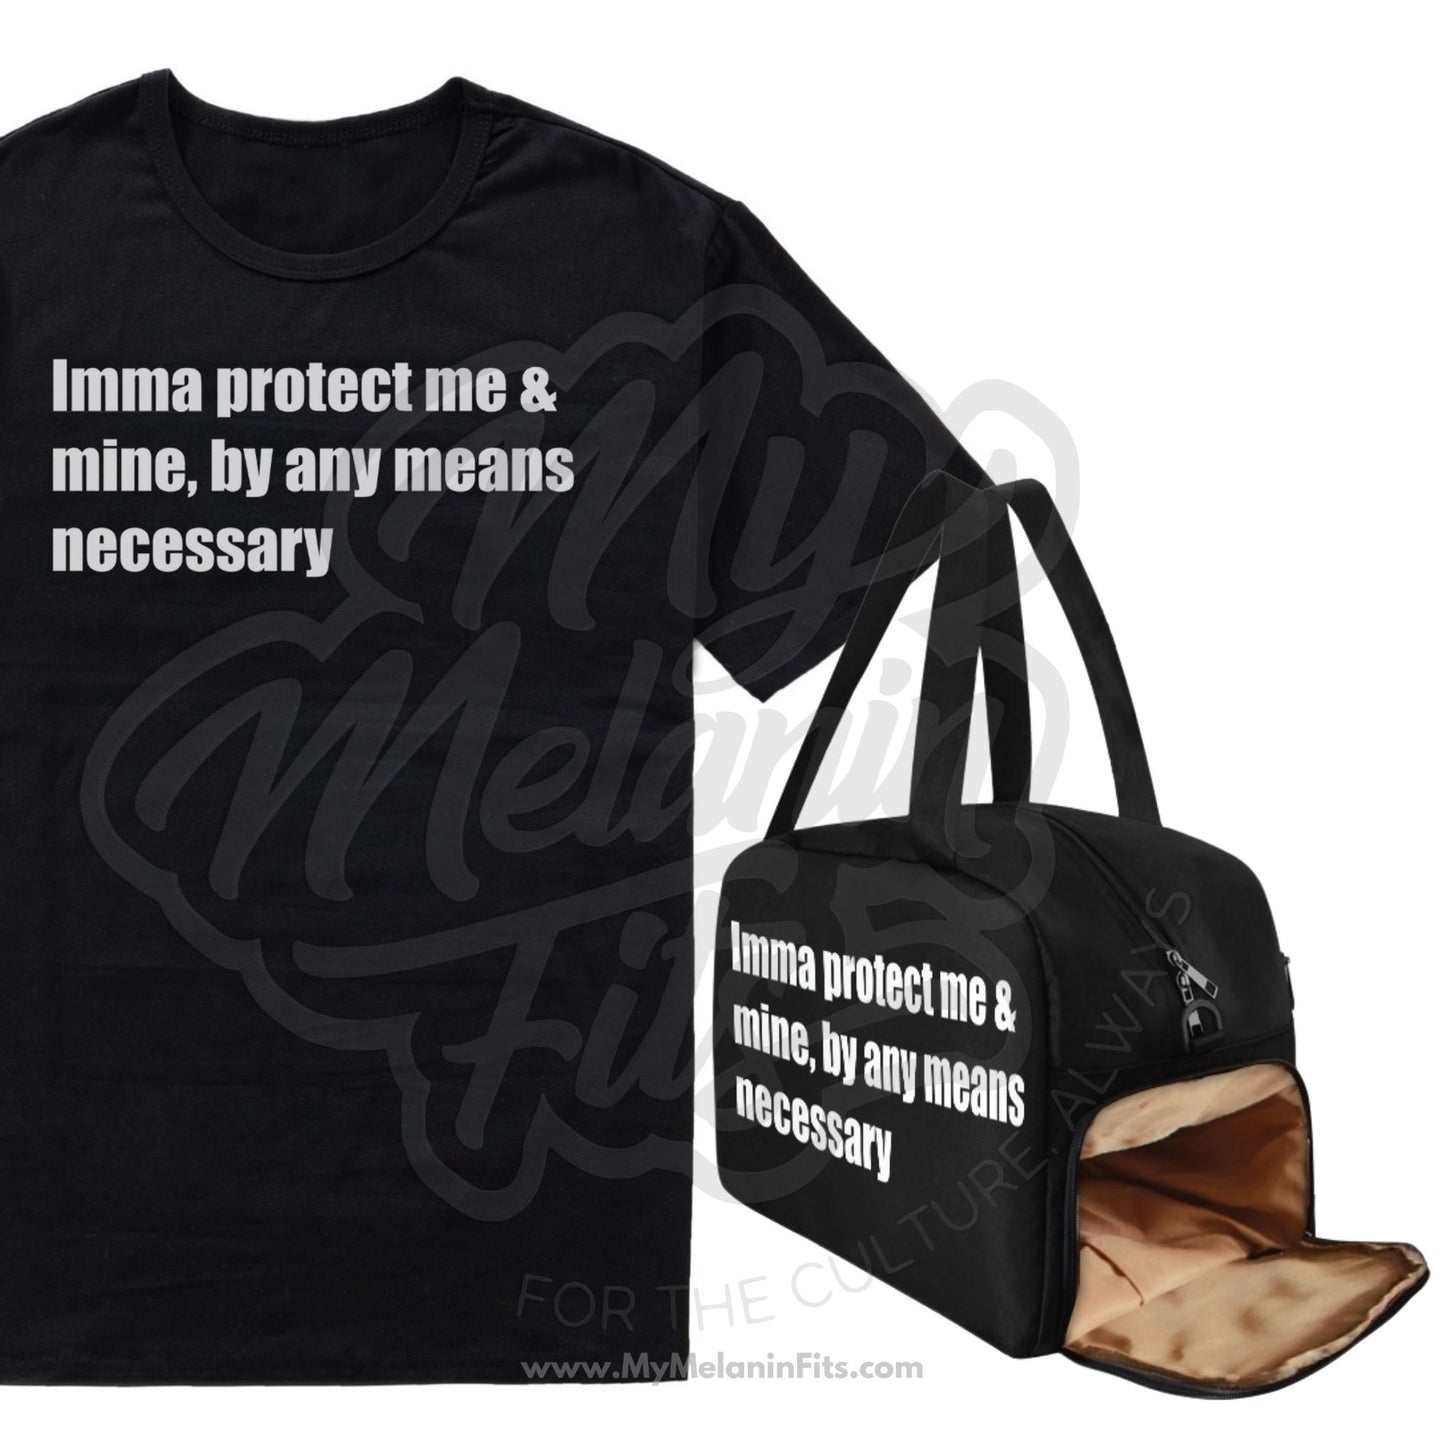 By Any Means Necessary Tee Apparel My Melanin Fits 